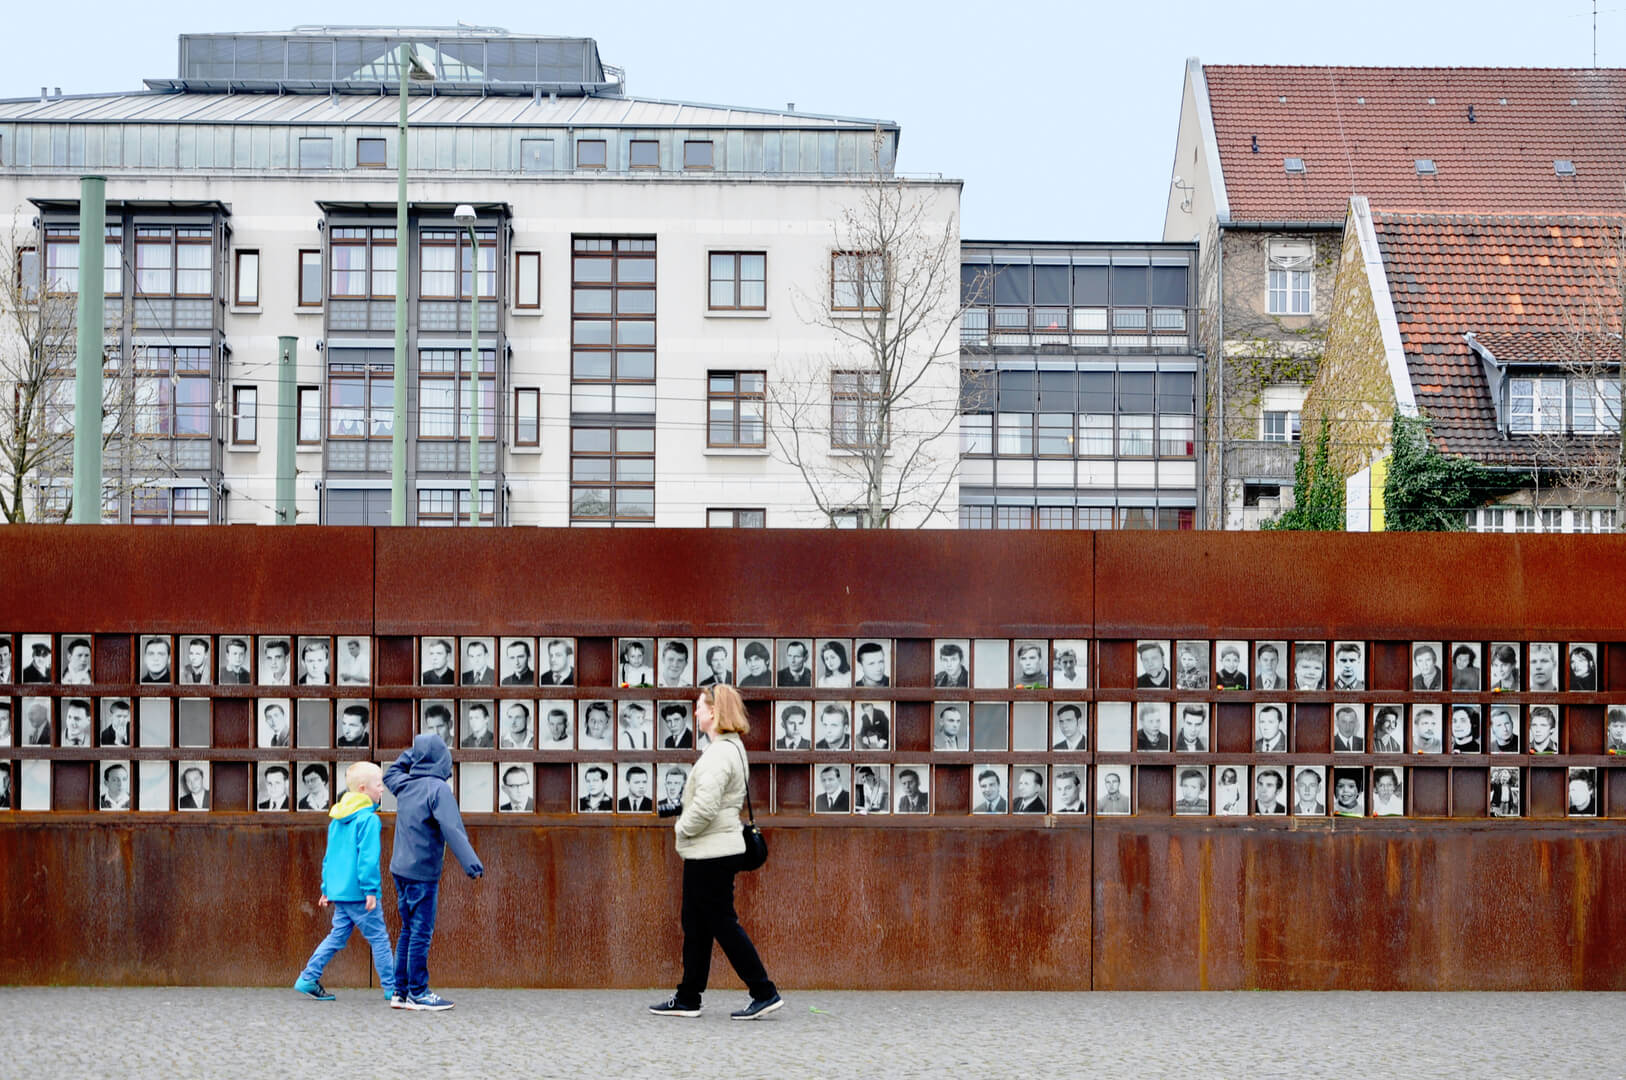 Monument of the Berlin Wall with photos of people and visitors.